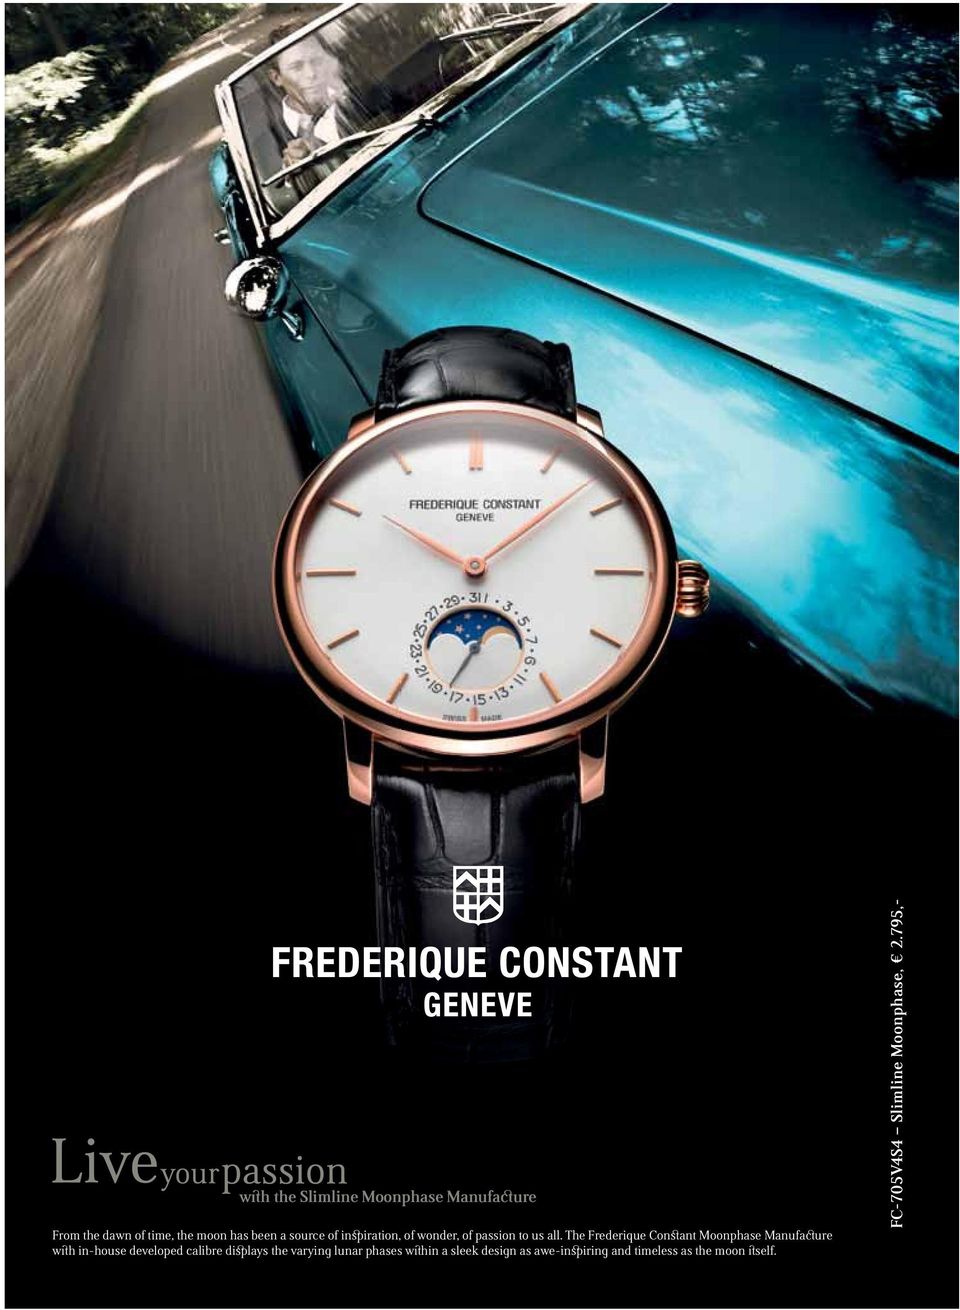 The Frederique Constant Moonphase Manufacture with in-house developed calibre displays the